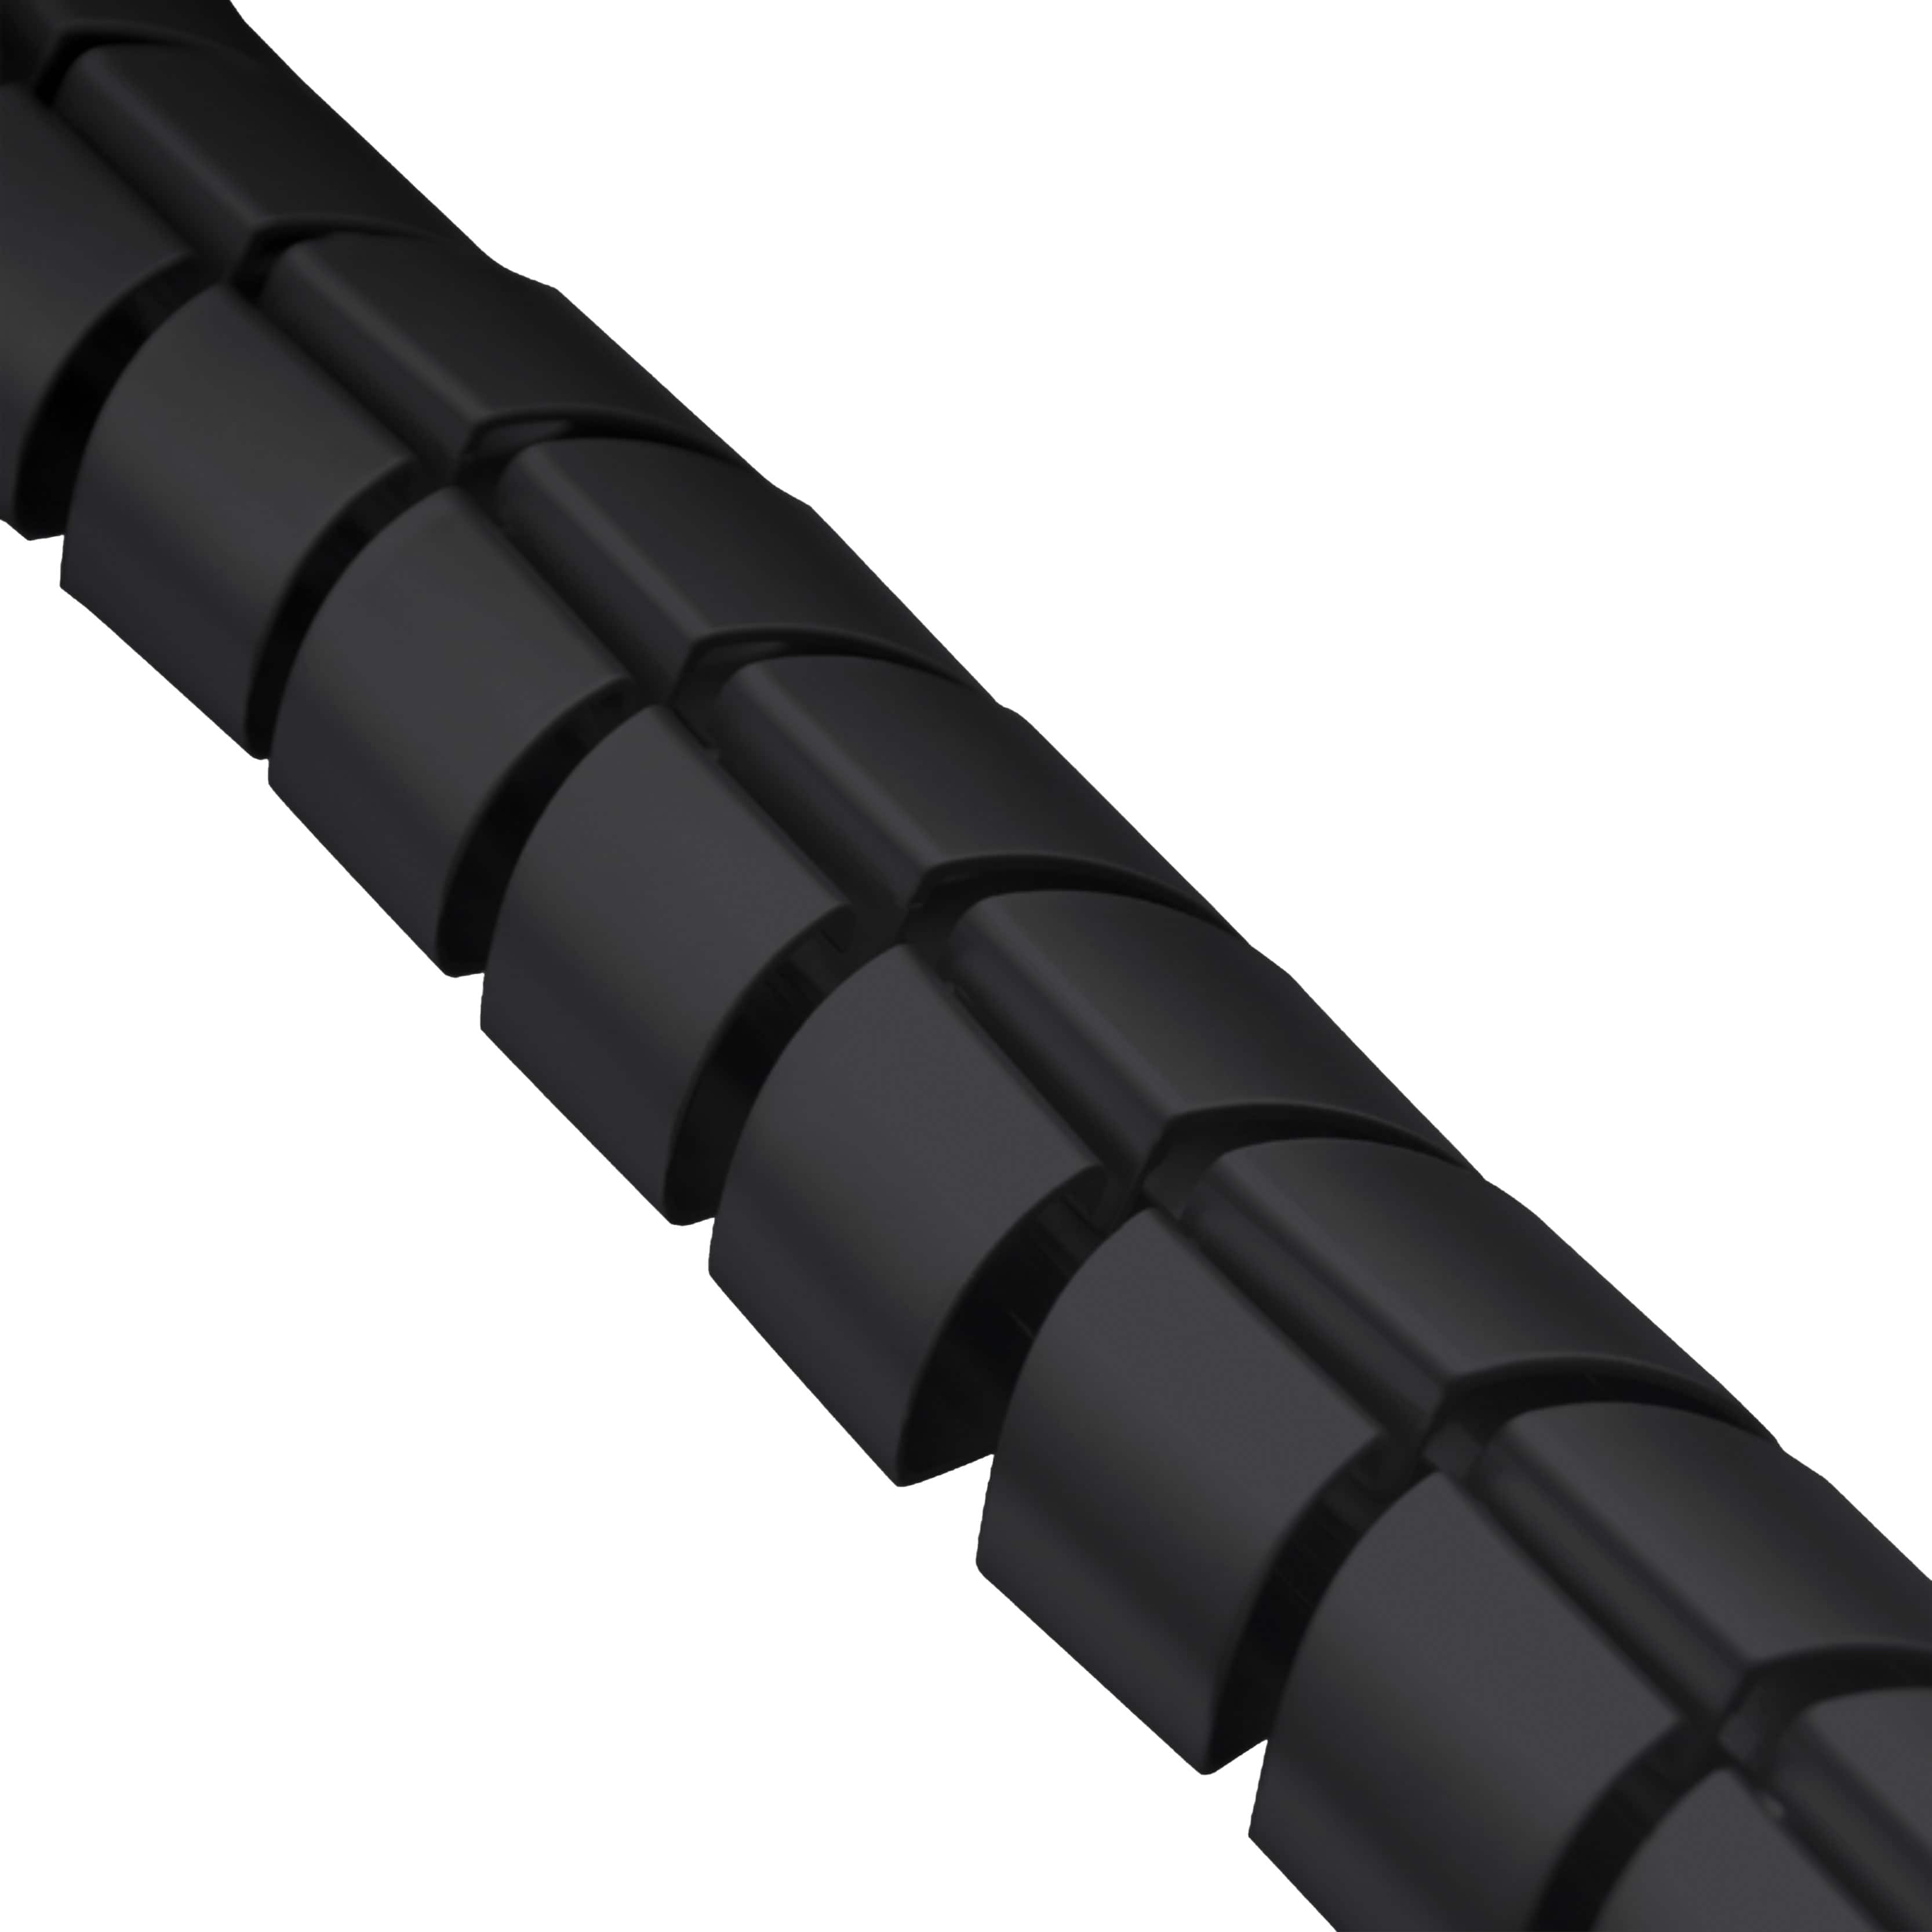 Cable guide 74.5 black